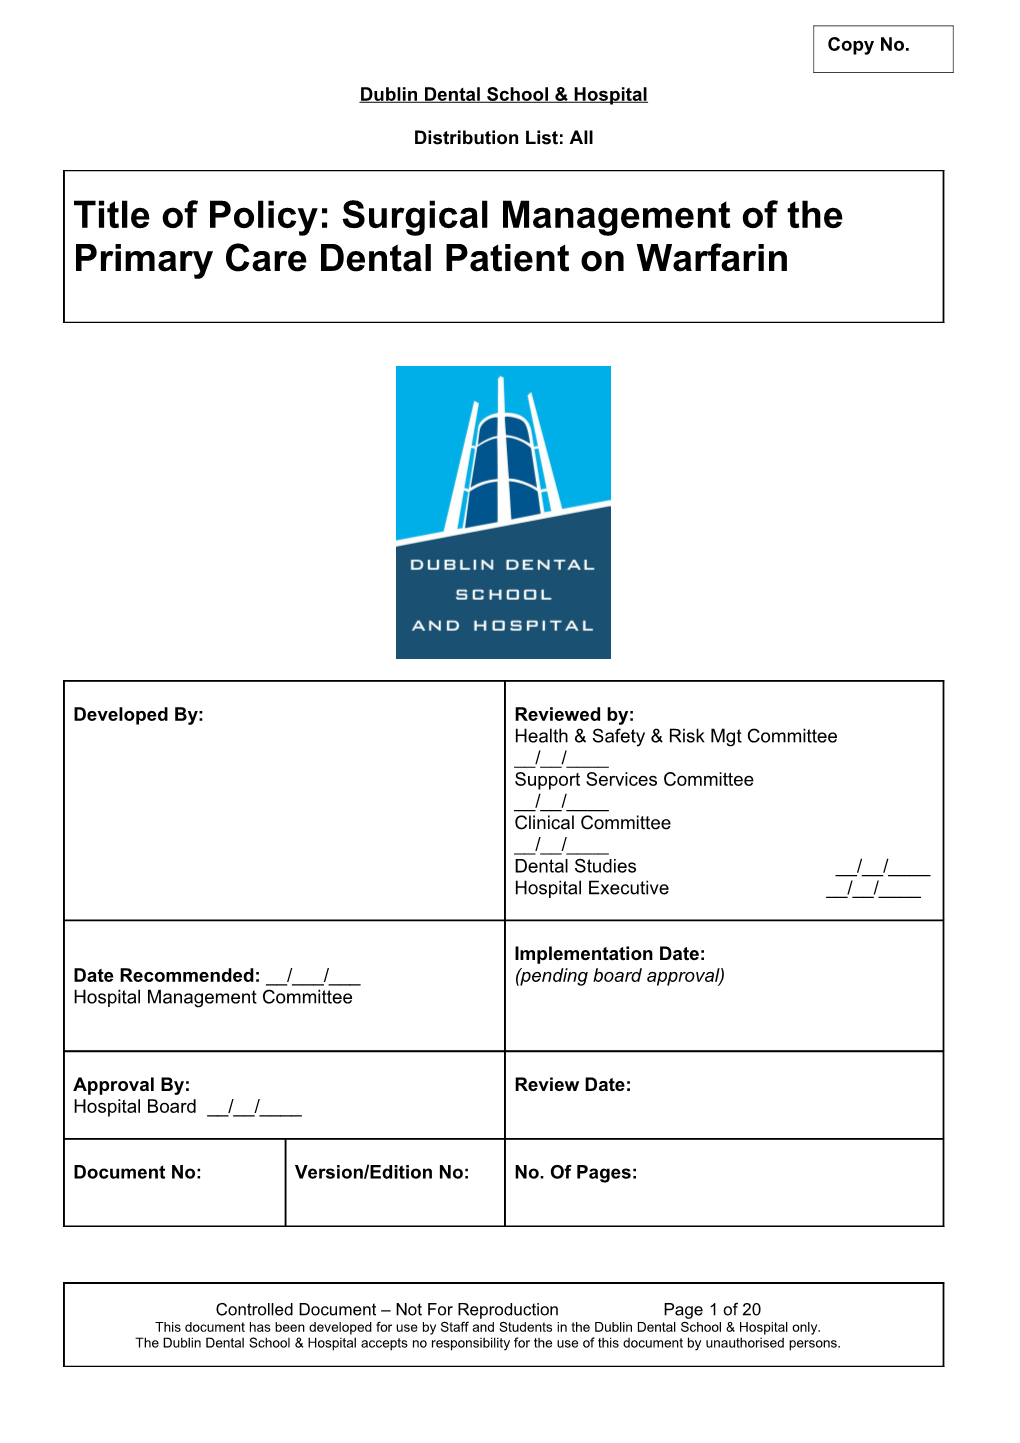 Surgical Management of the Primary Care Dental Patient on Warfarin Final